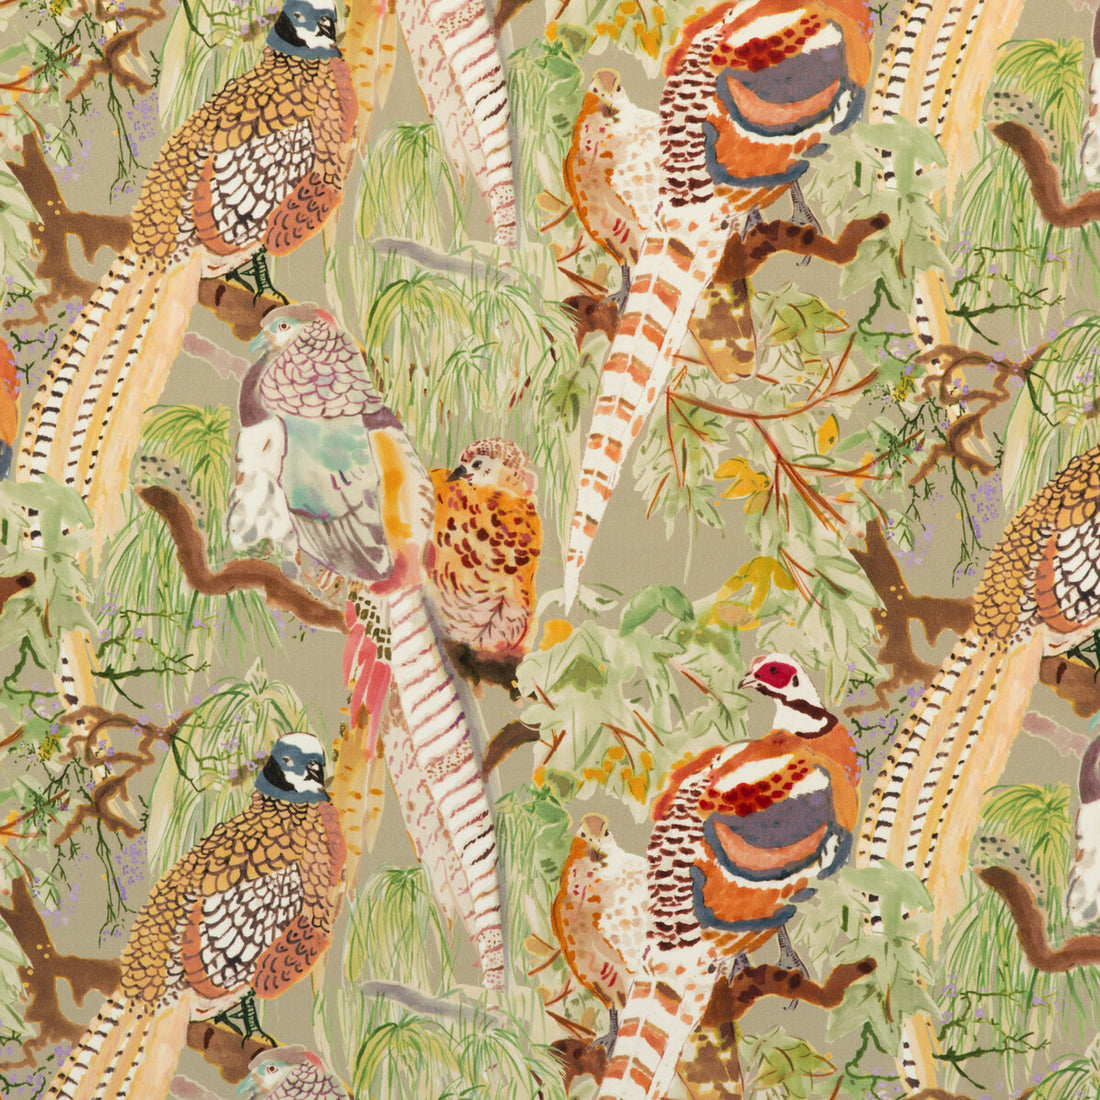 Game Birds Velvet fabric in stone/multi color - pattern FD268.K102.0 - by Mulberry in the Bohemian Romance collection